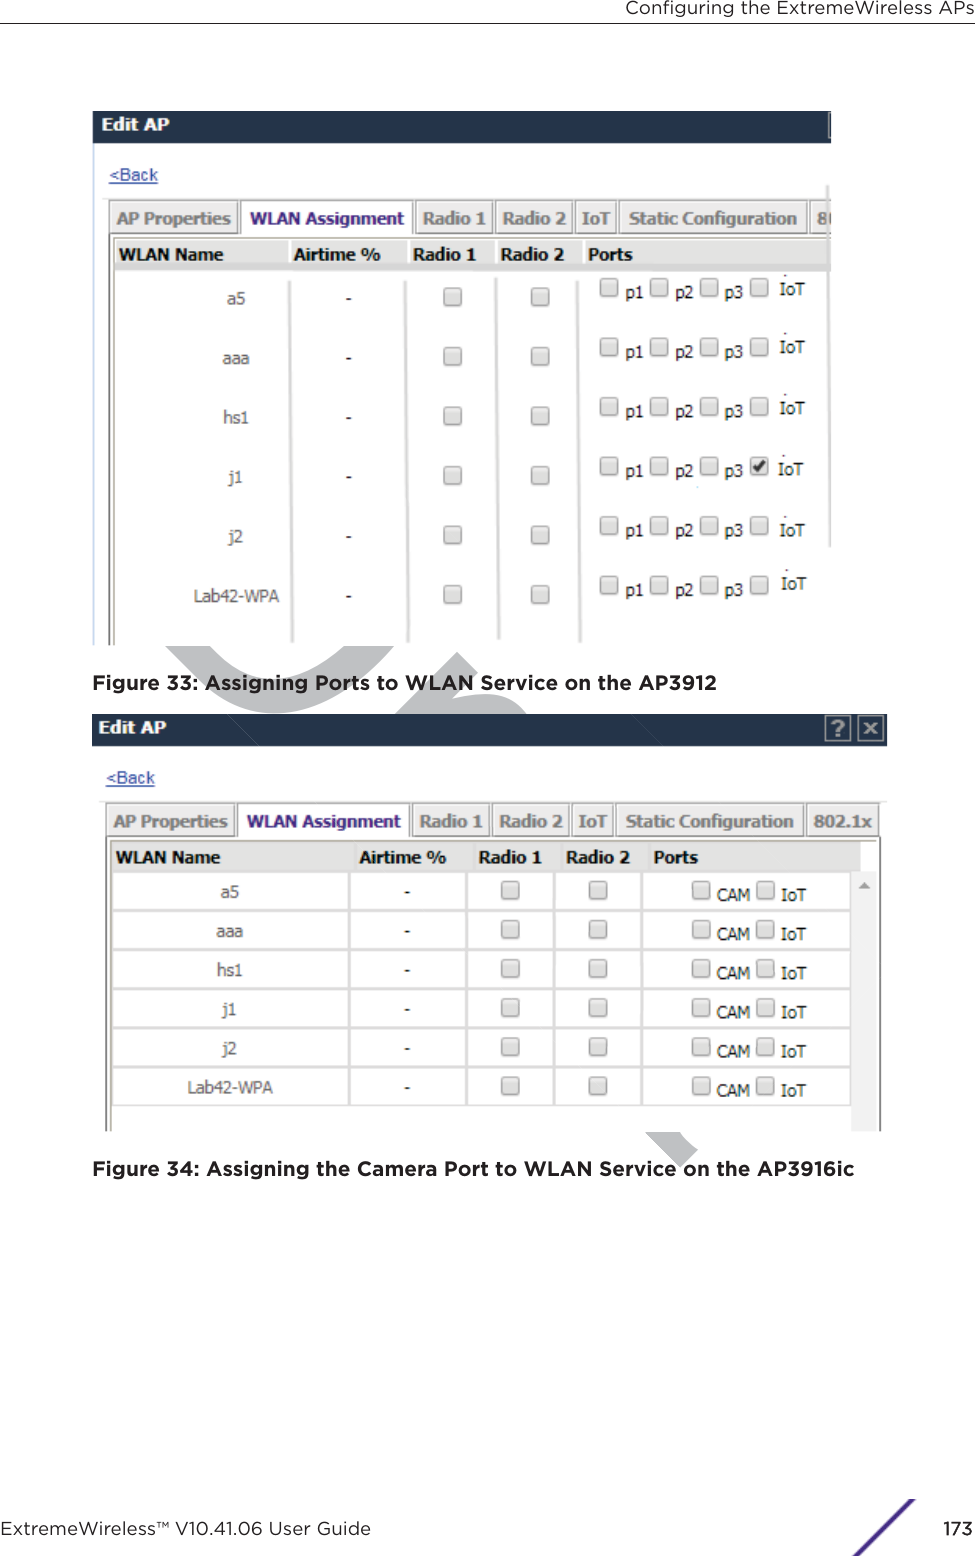 DraftFigure 33: Assigning Ports to WLAN Service on the AP3912Figure 34: Assigning the Camera Port to WLAN Service on the AP3916icConﬁguring the ExtremeWireless APsExtremeWireless™ V10.41.06 User Guide 1173